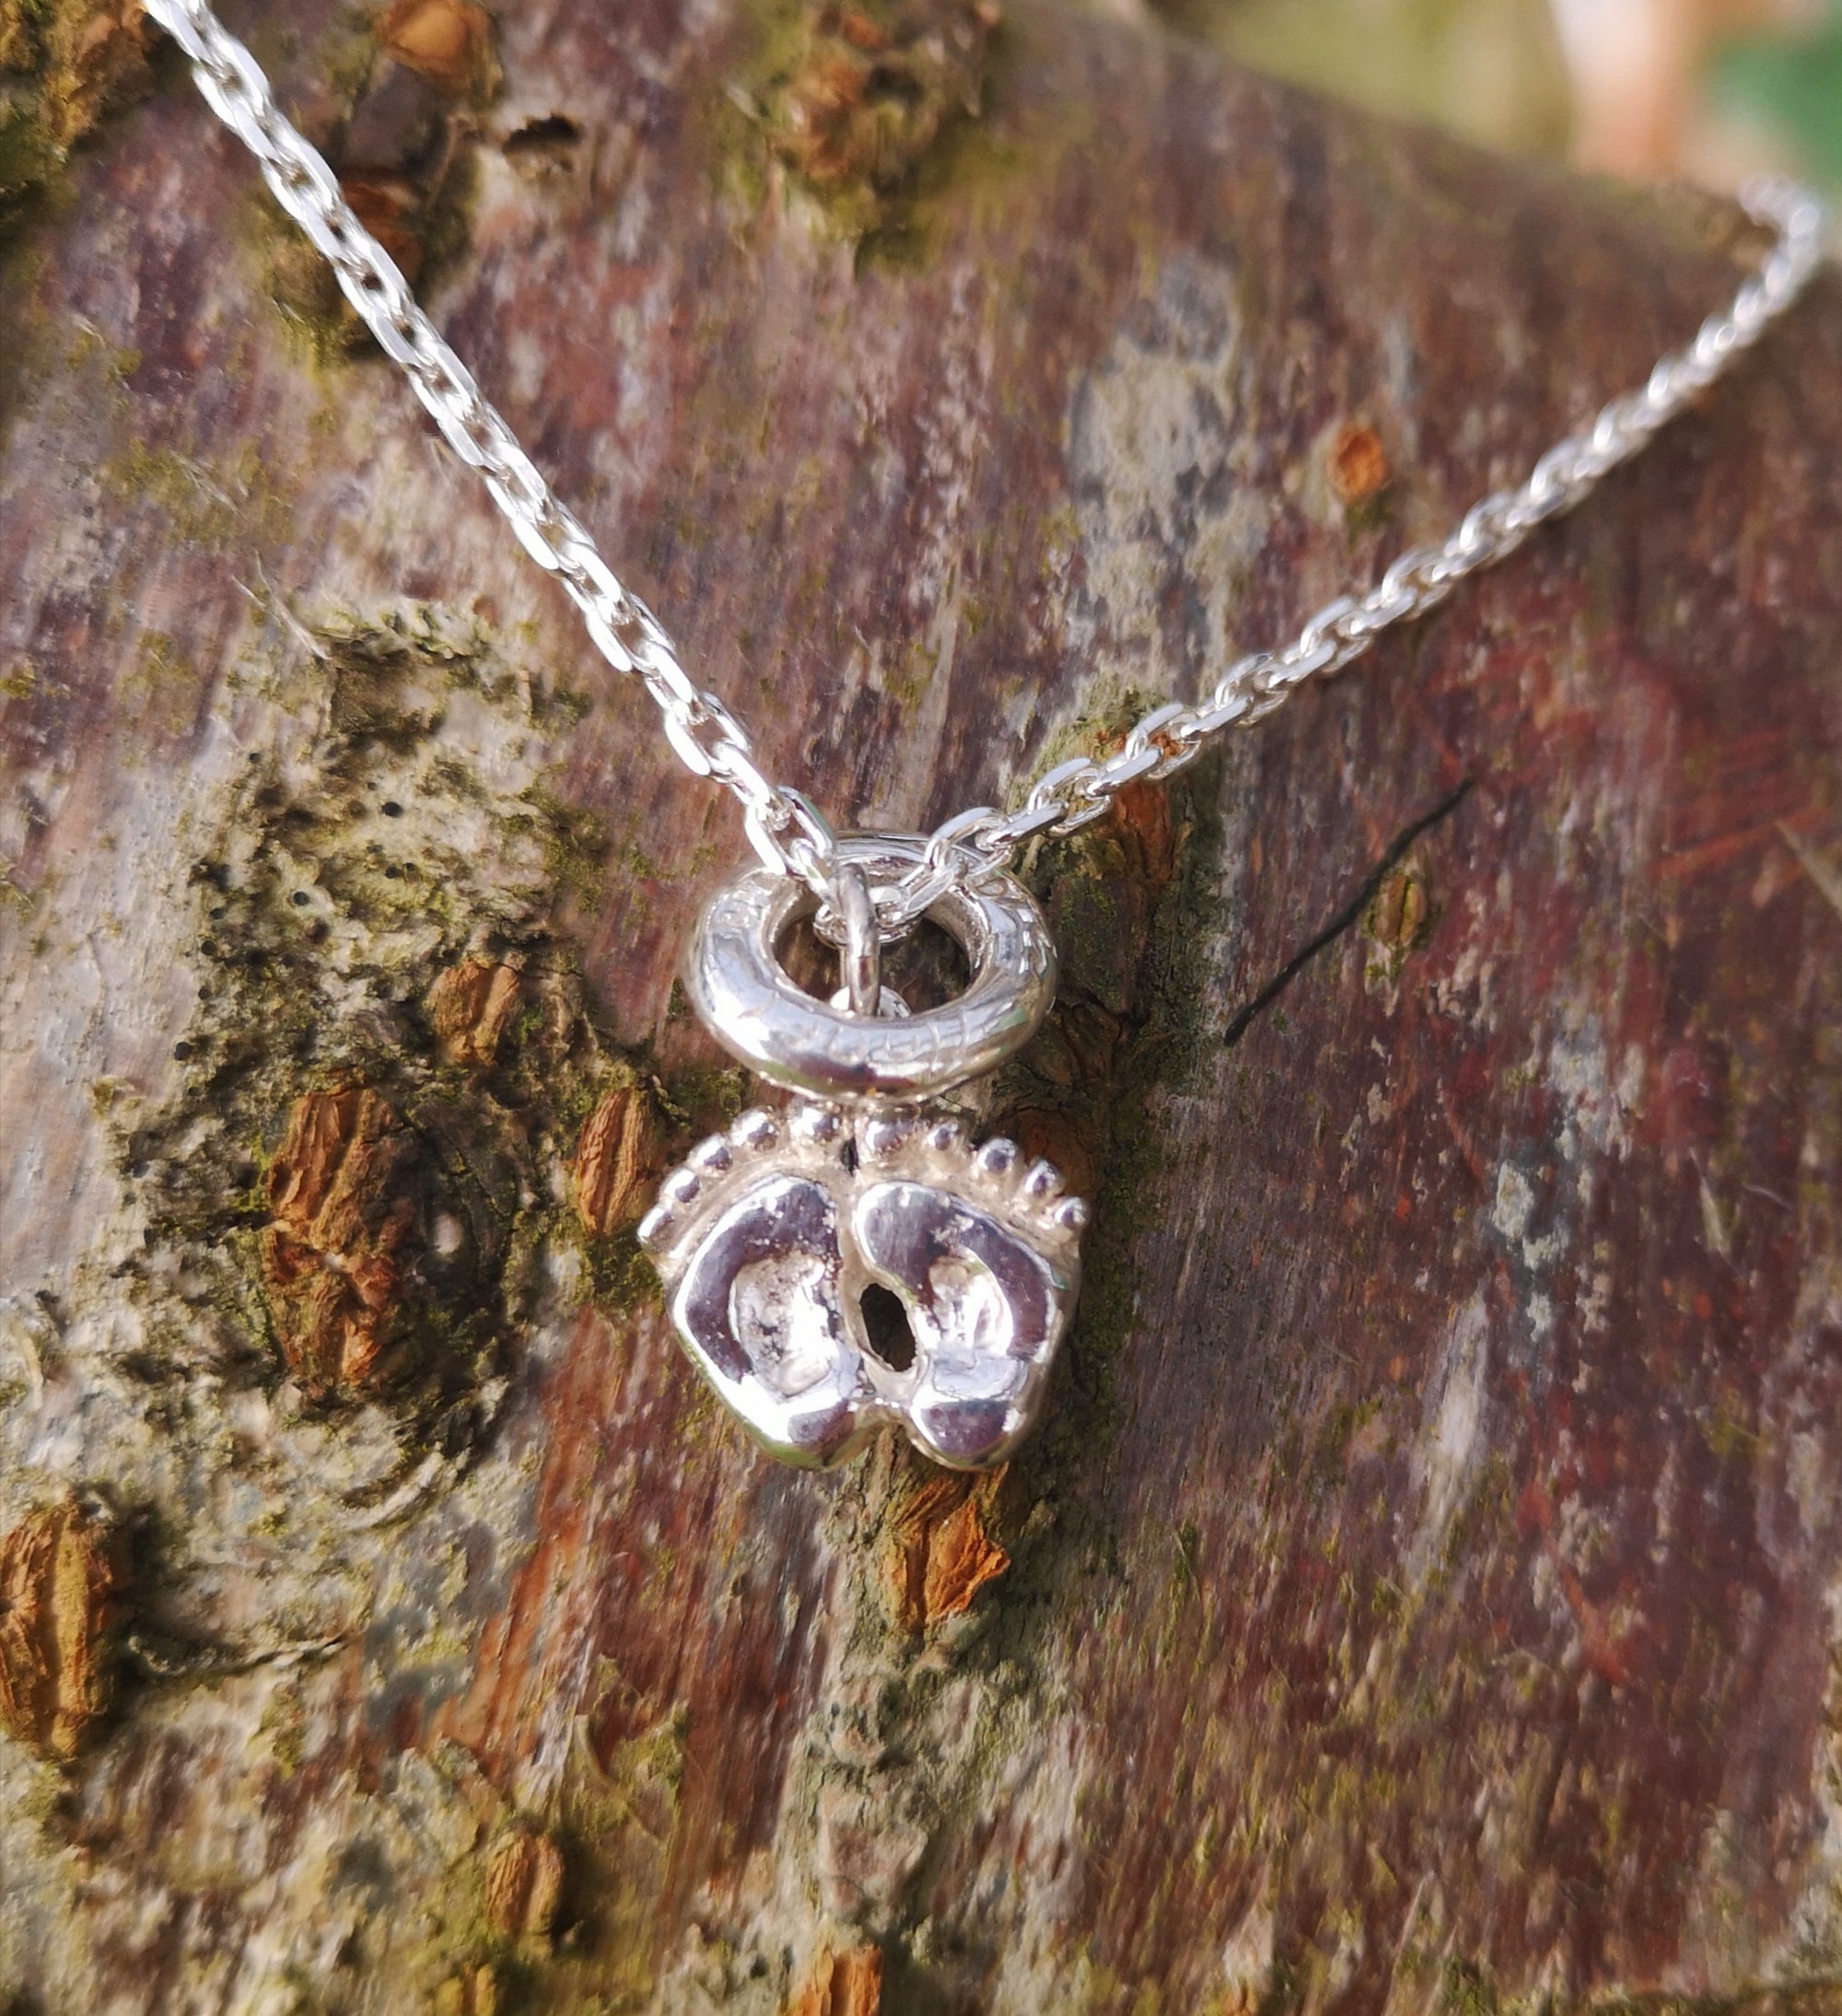 Sterling silver baby feet and angel halo pendant, part of Elena Brennan's angel jewellery collection. This angel pendant is hung against a tree branch.